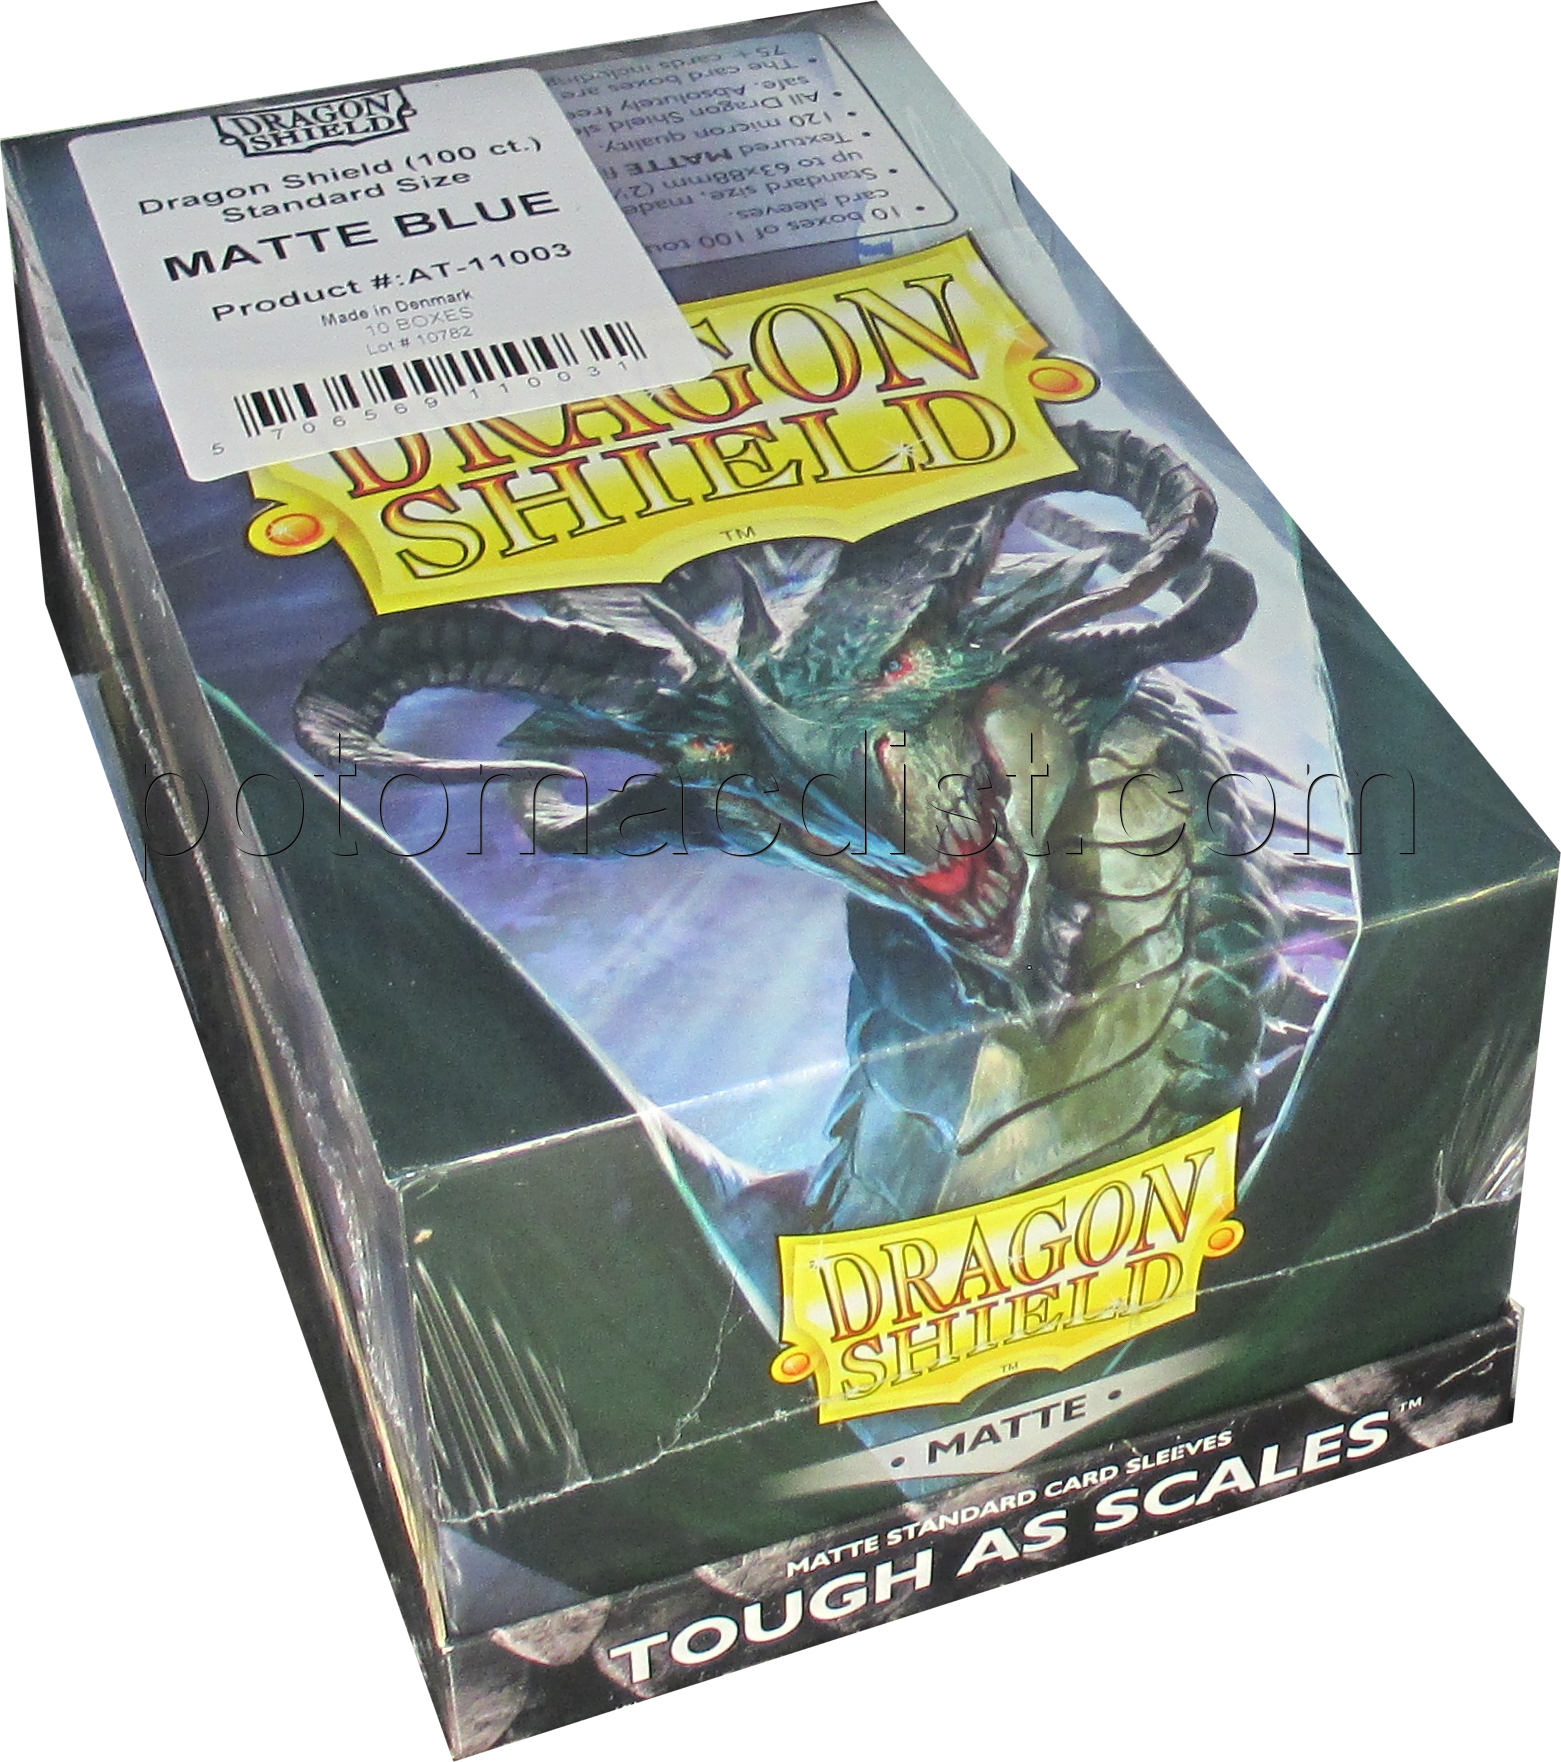 DRAGON SHIELD MATTE Standard Card Sleeves BLUE Pack of 100  #AT-11003 